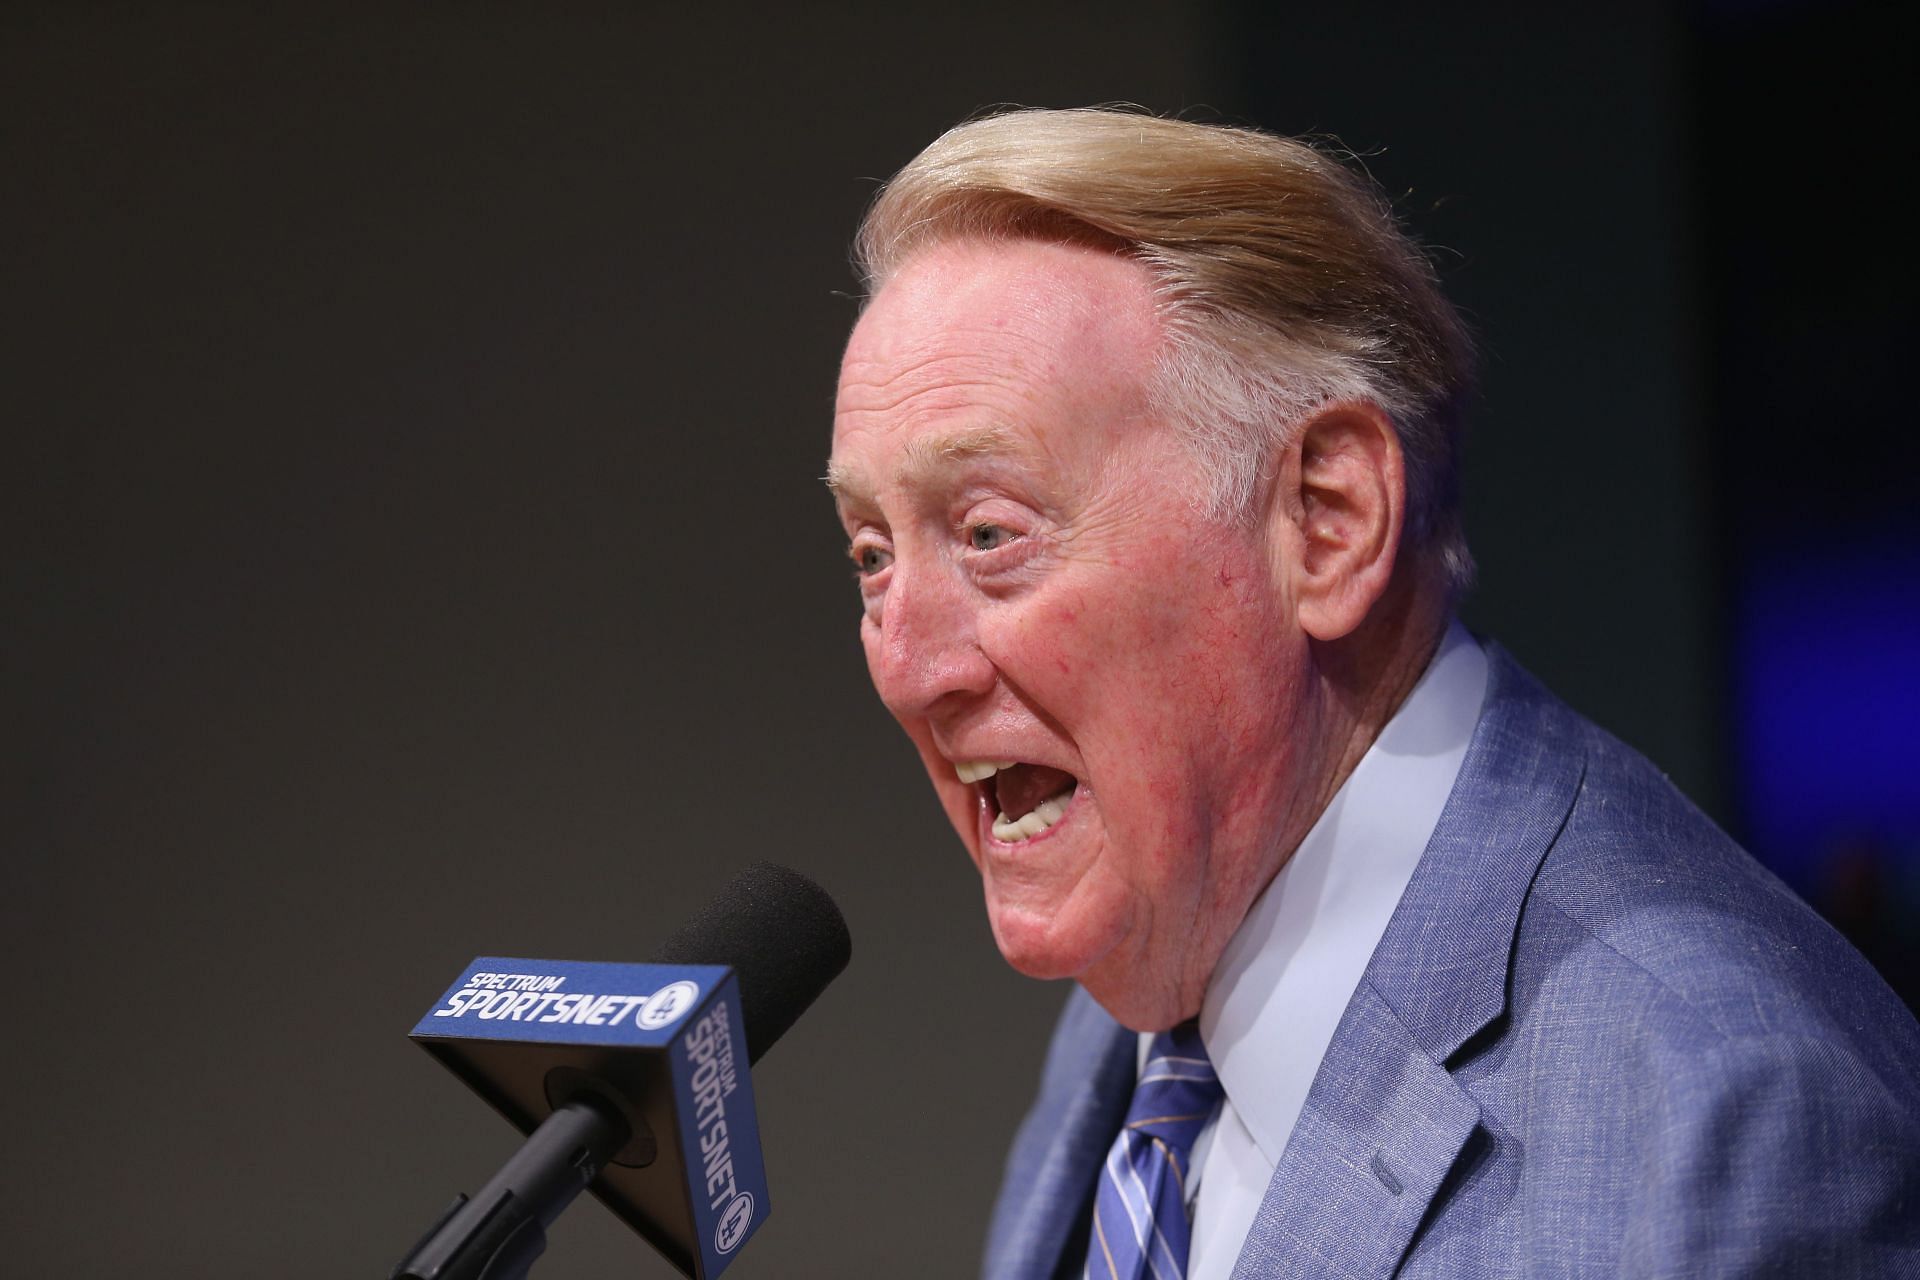 Vin Scully called games for the LA Dodgers for a remarkable 67 years. From 1950 until his retirement in 2016.